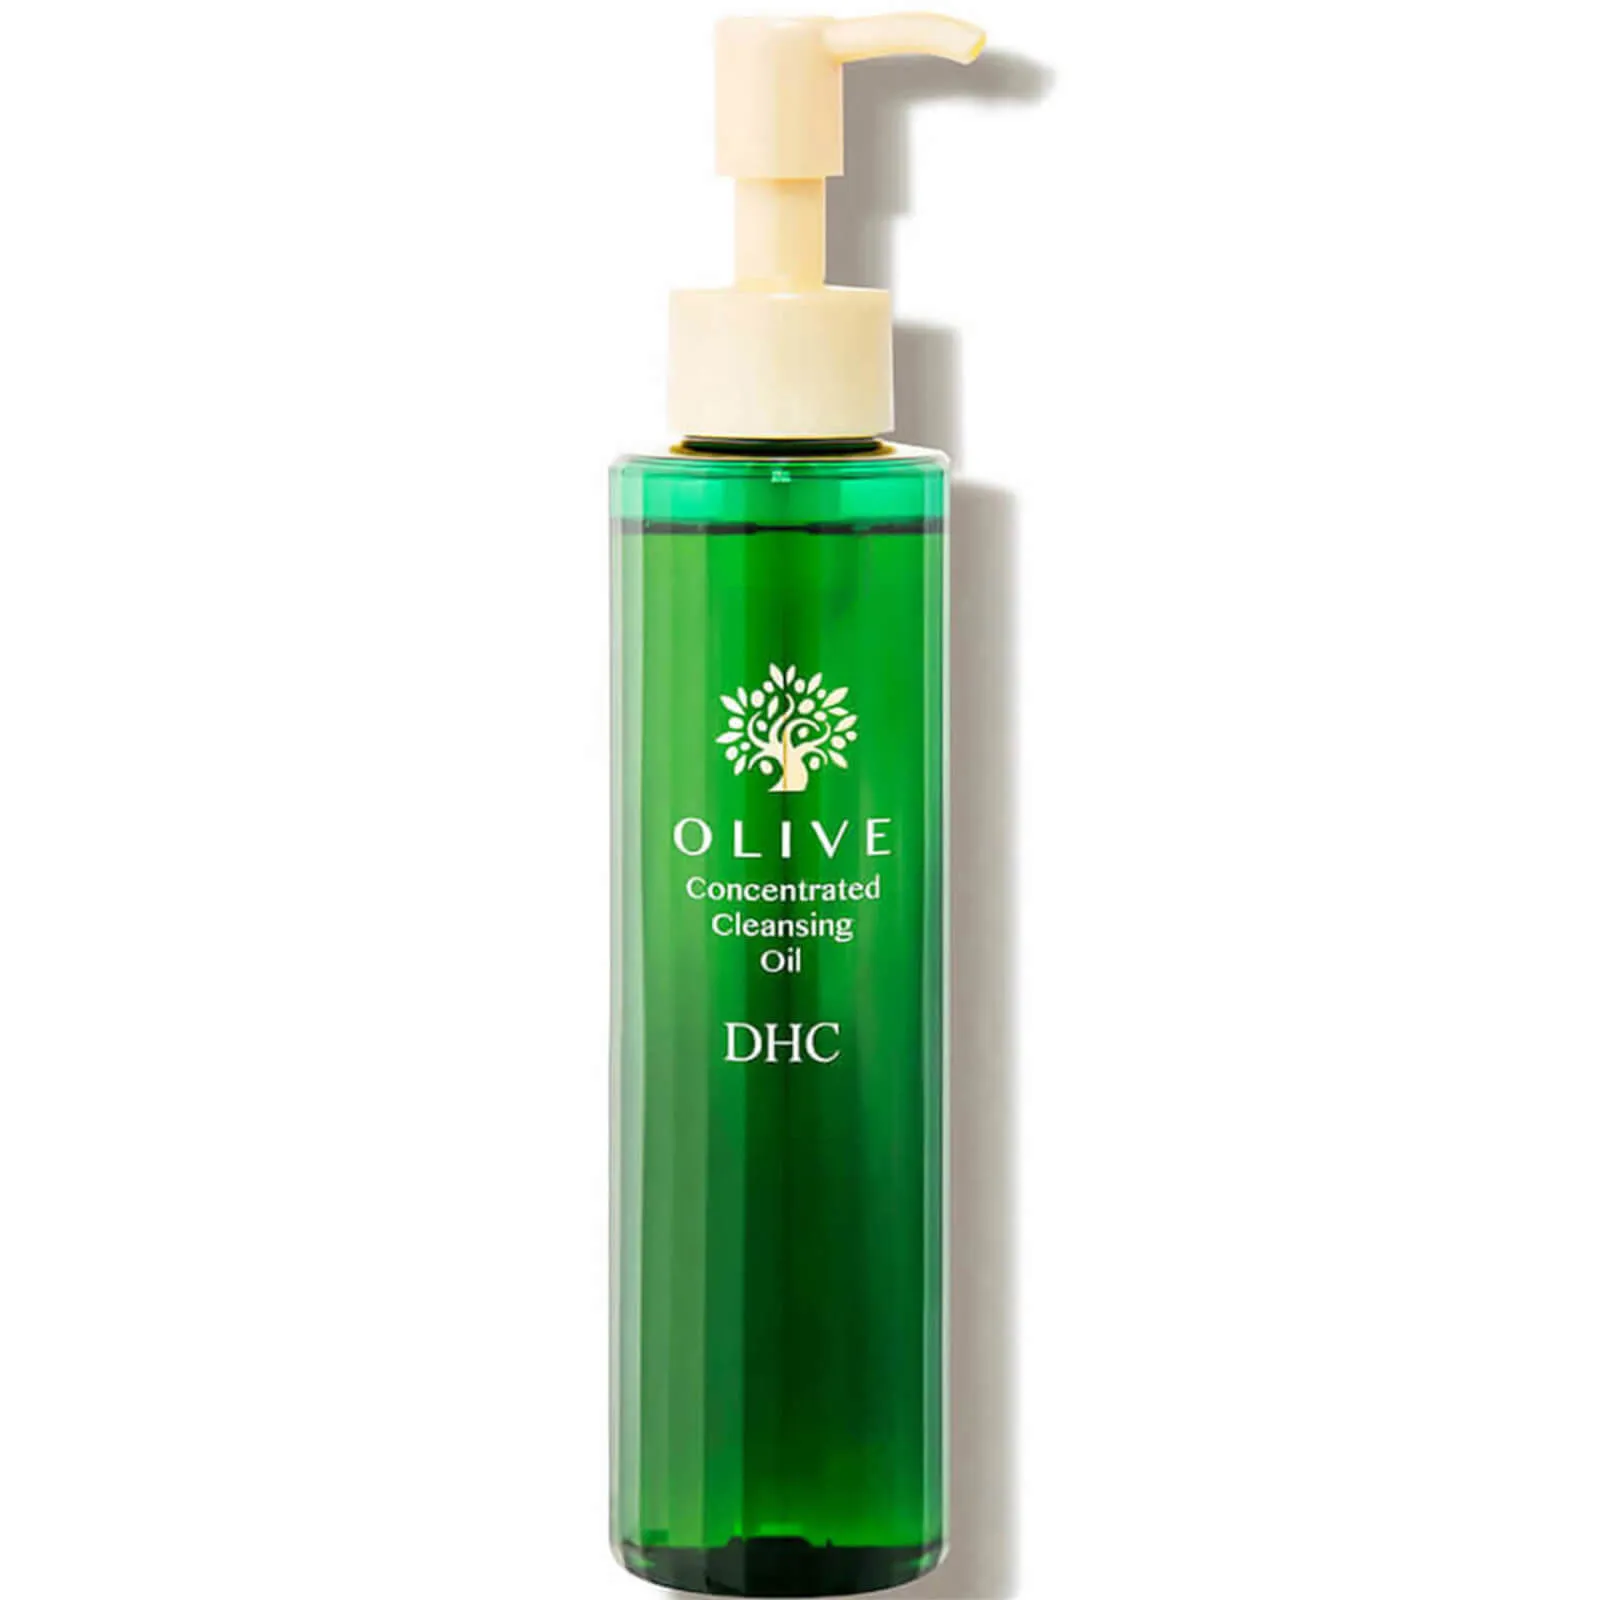  Olive Concentrated Cleansing Oil 150ml